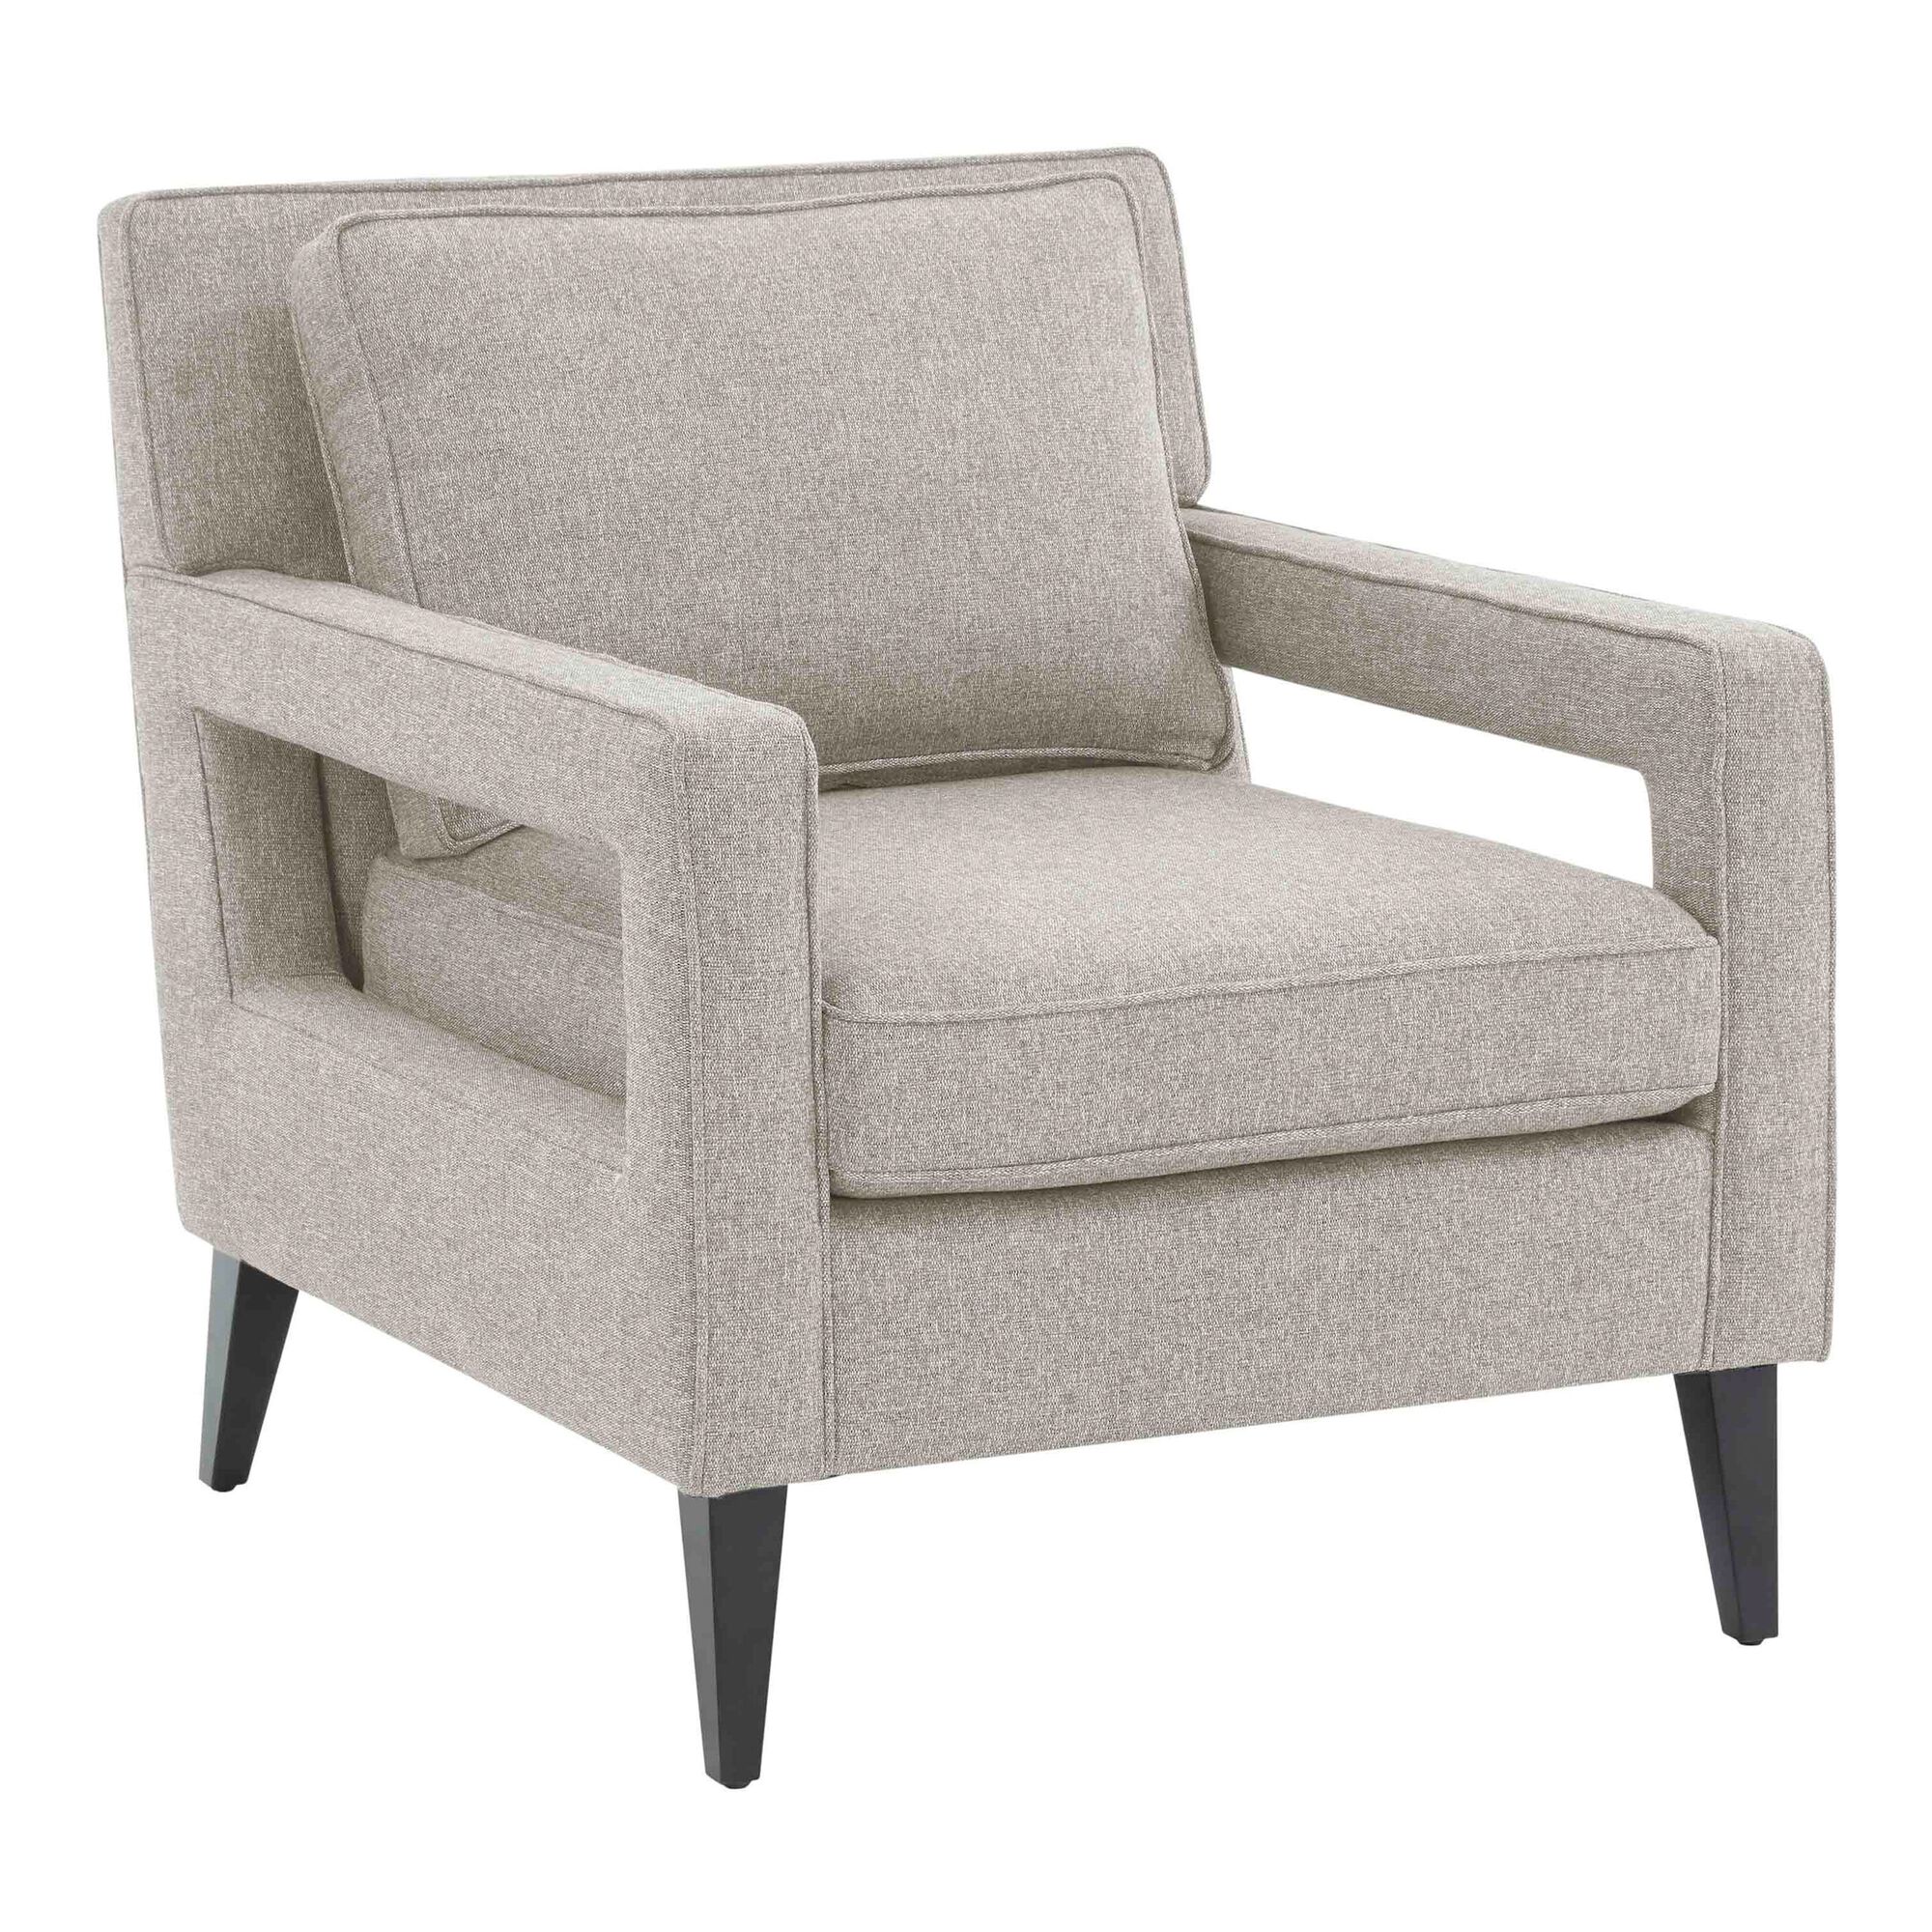 Enfield Tweed Upholstered Chair - World Market